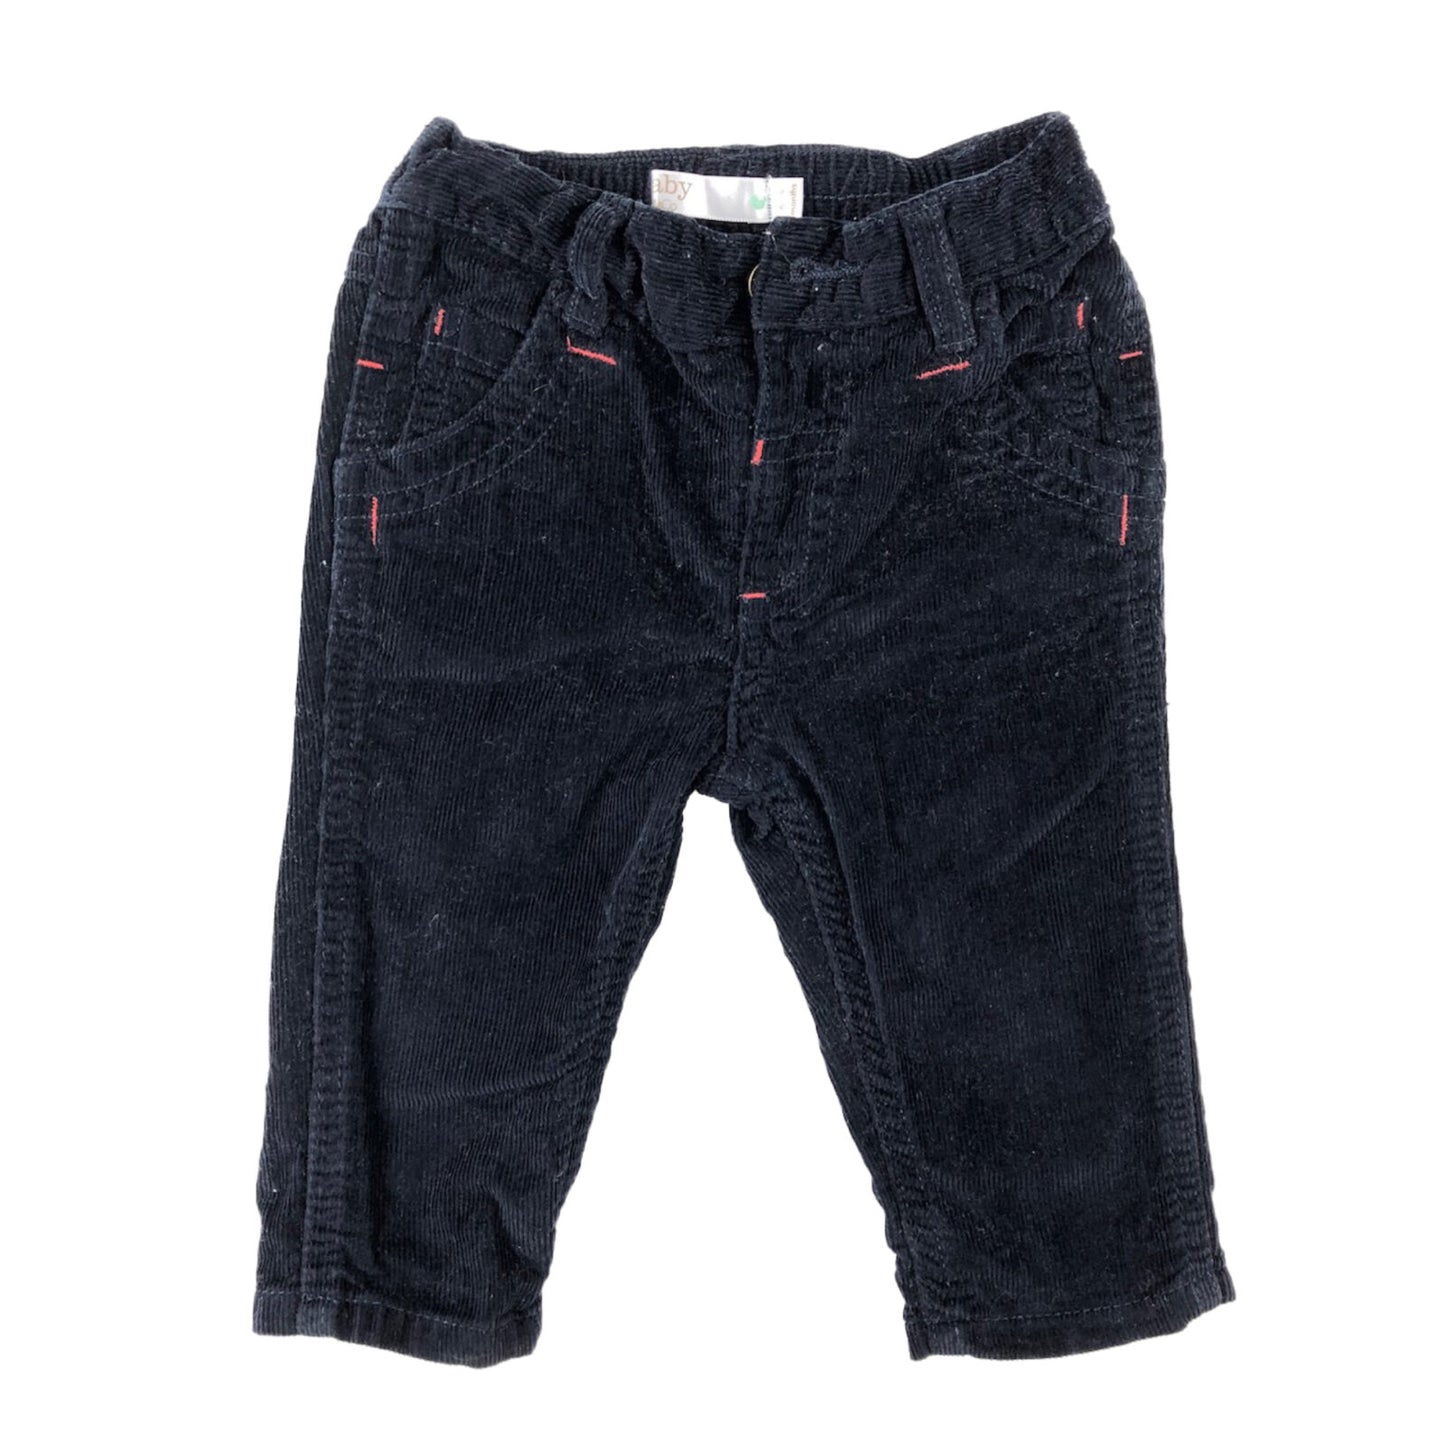 Babycord trousers